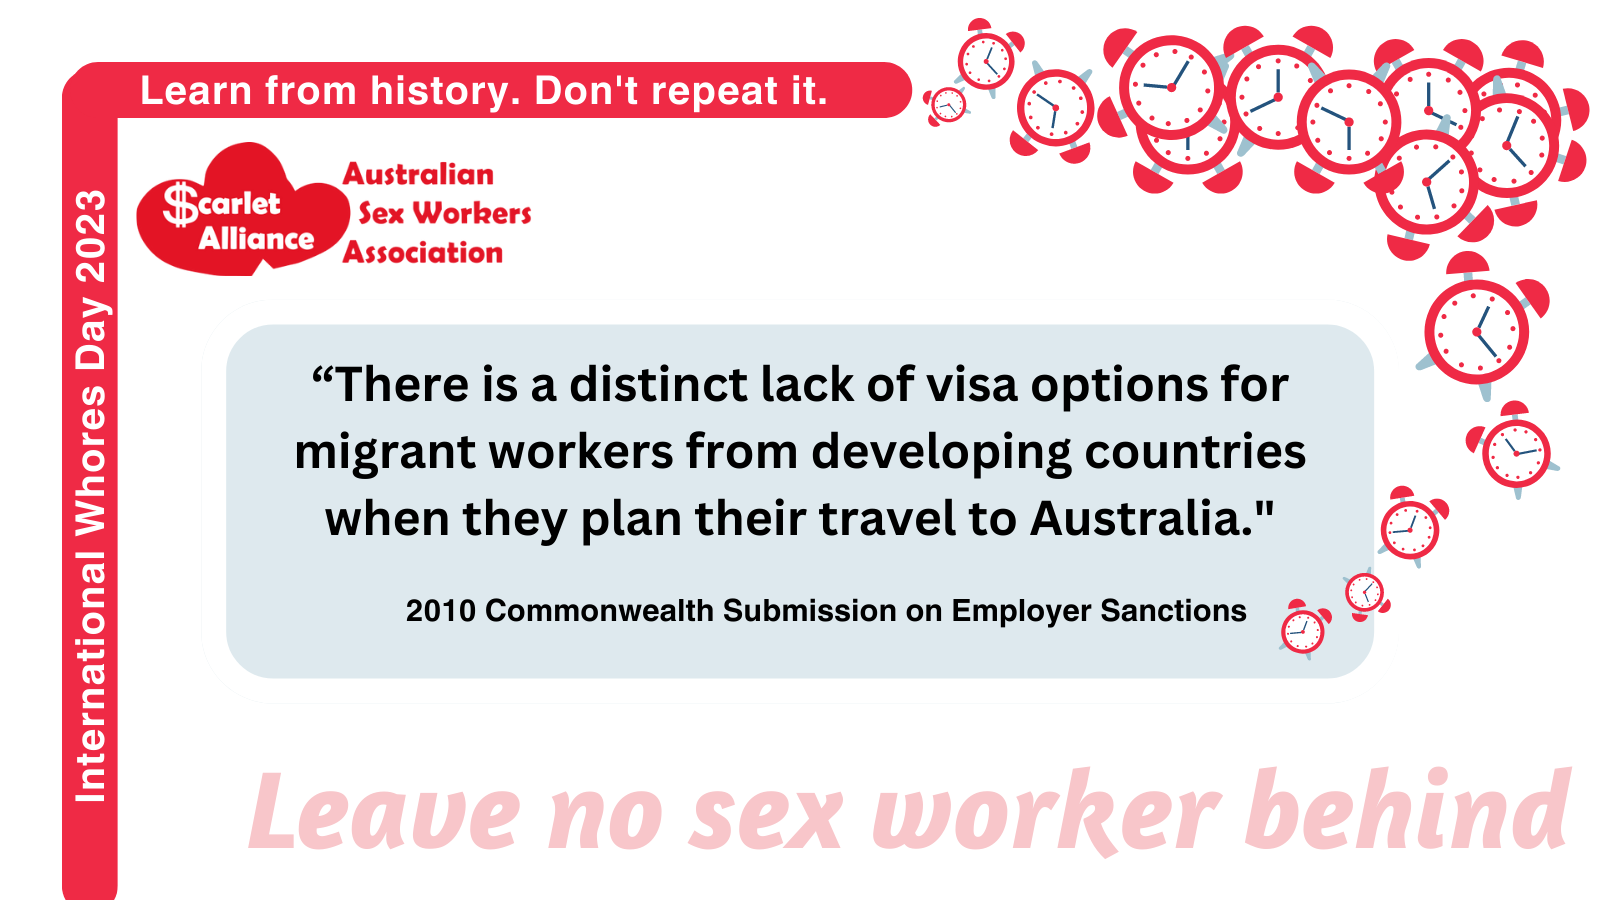 “There is a distinct lack of visa options for migrant workers from developing countries when they plan their travel to Australia. This lack of options forces workers to consider going through third party agents, debt contractors and/or traffickers. The less money a person has to invest in their documentation, the more likely it is that they will be vulnerable to third party agents and others making migration and visa decisions on their behalf.”